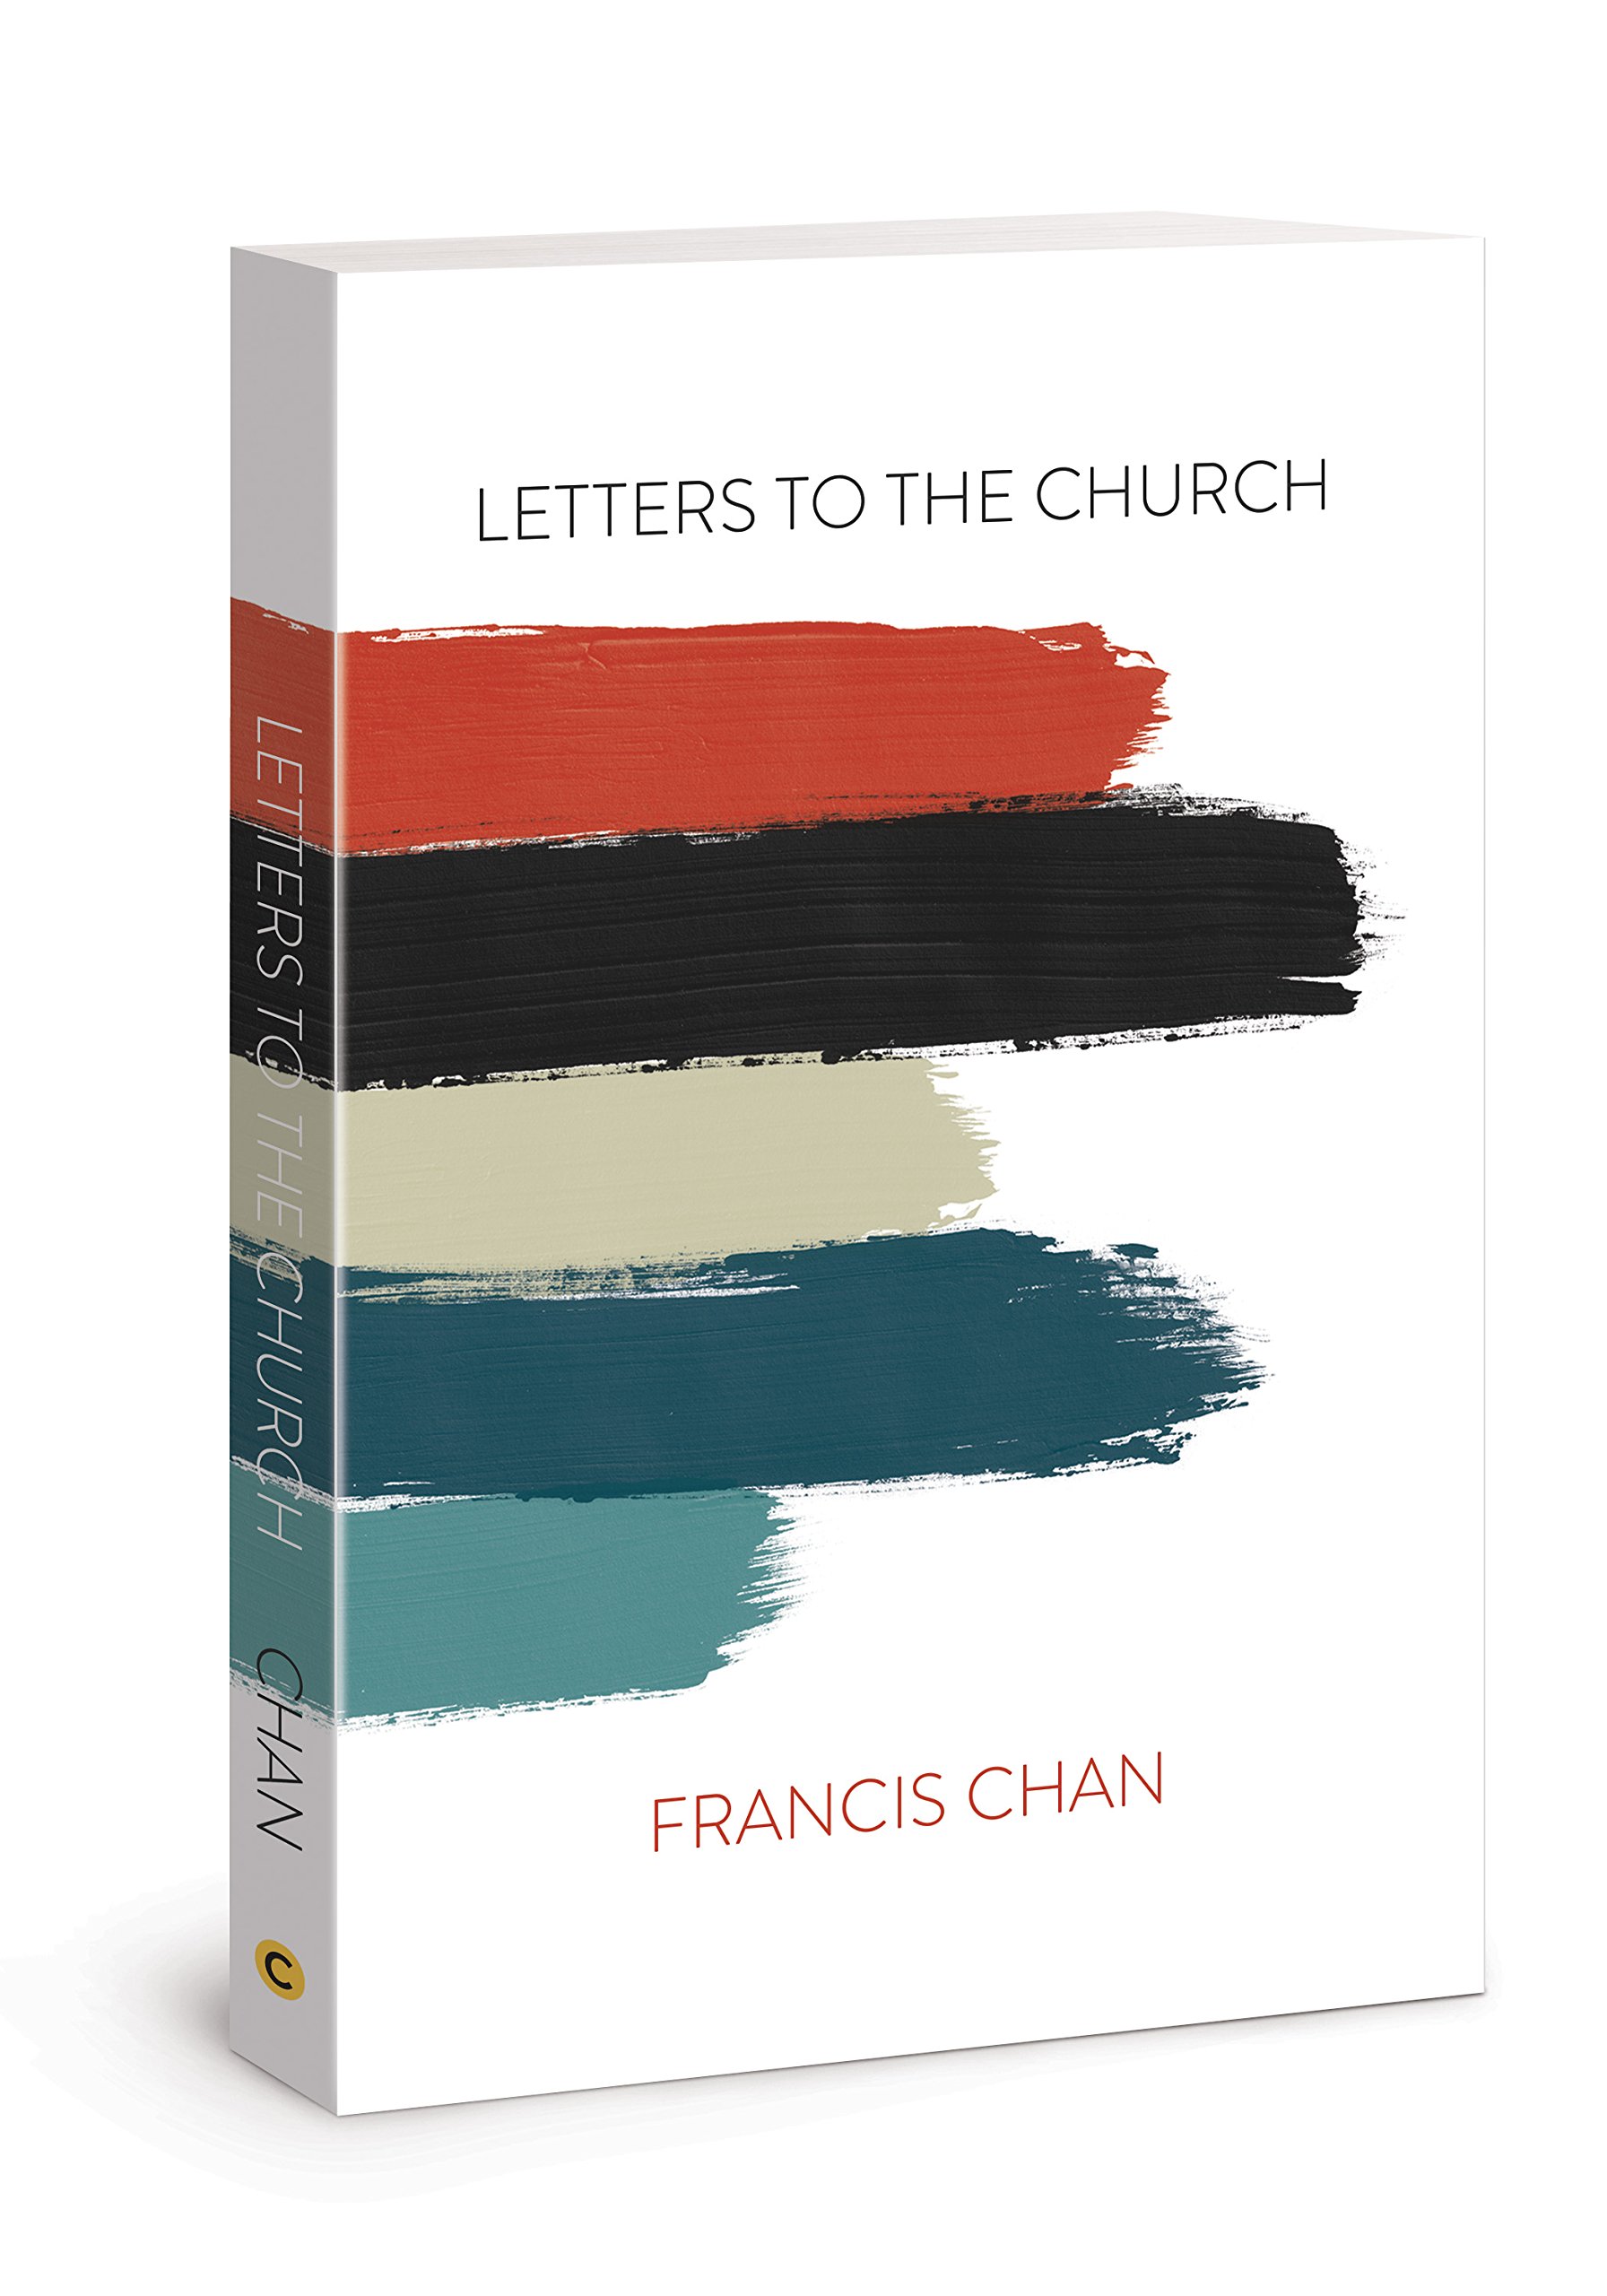 More information on Letters To The Church